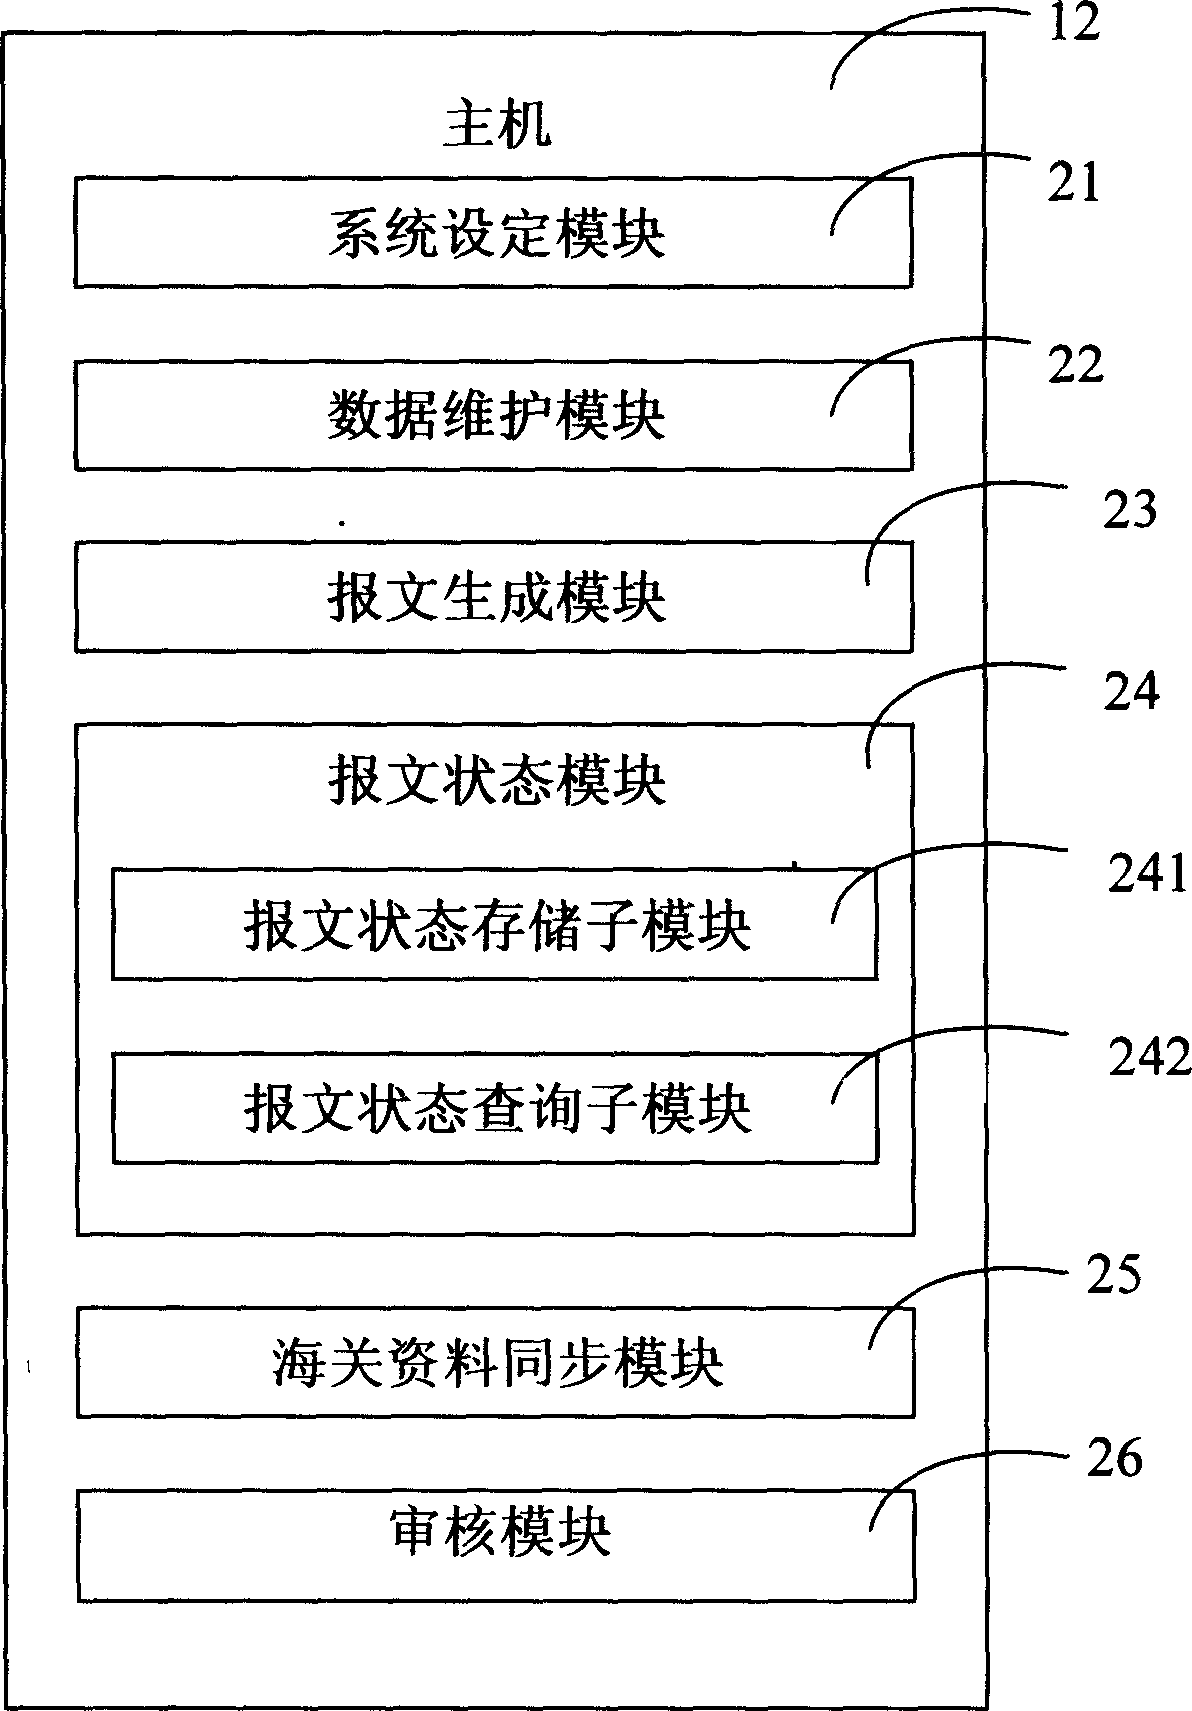 Online monitoring system and method for materials to import or export at custom